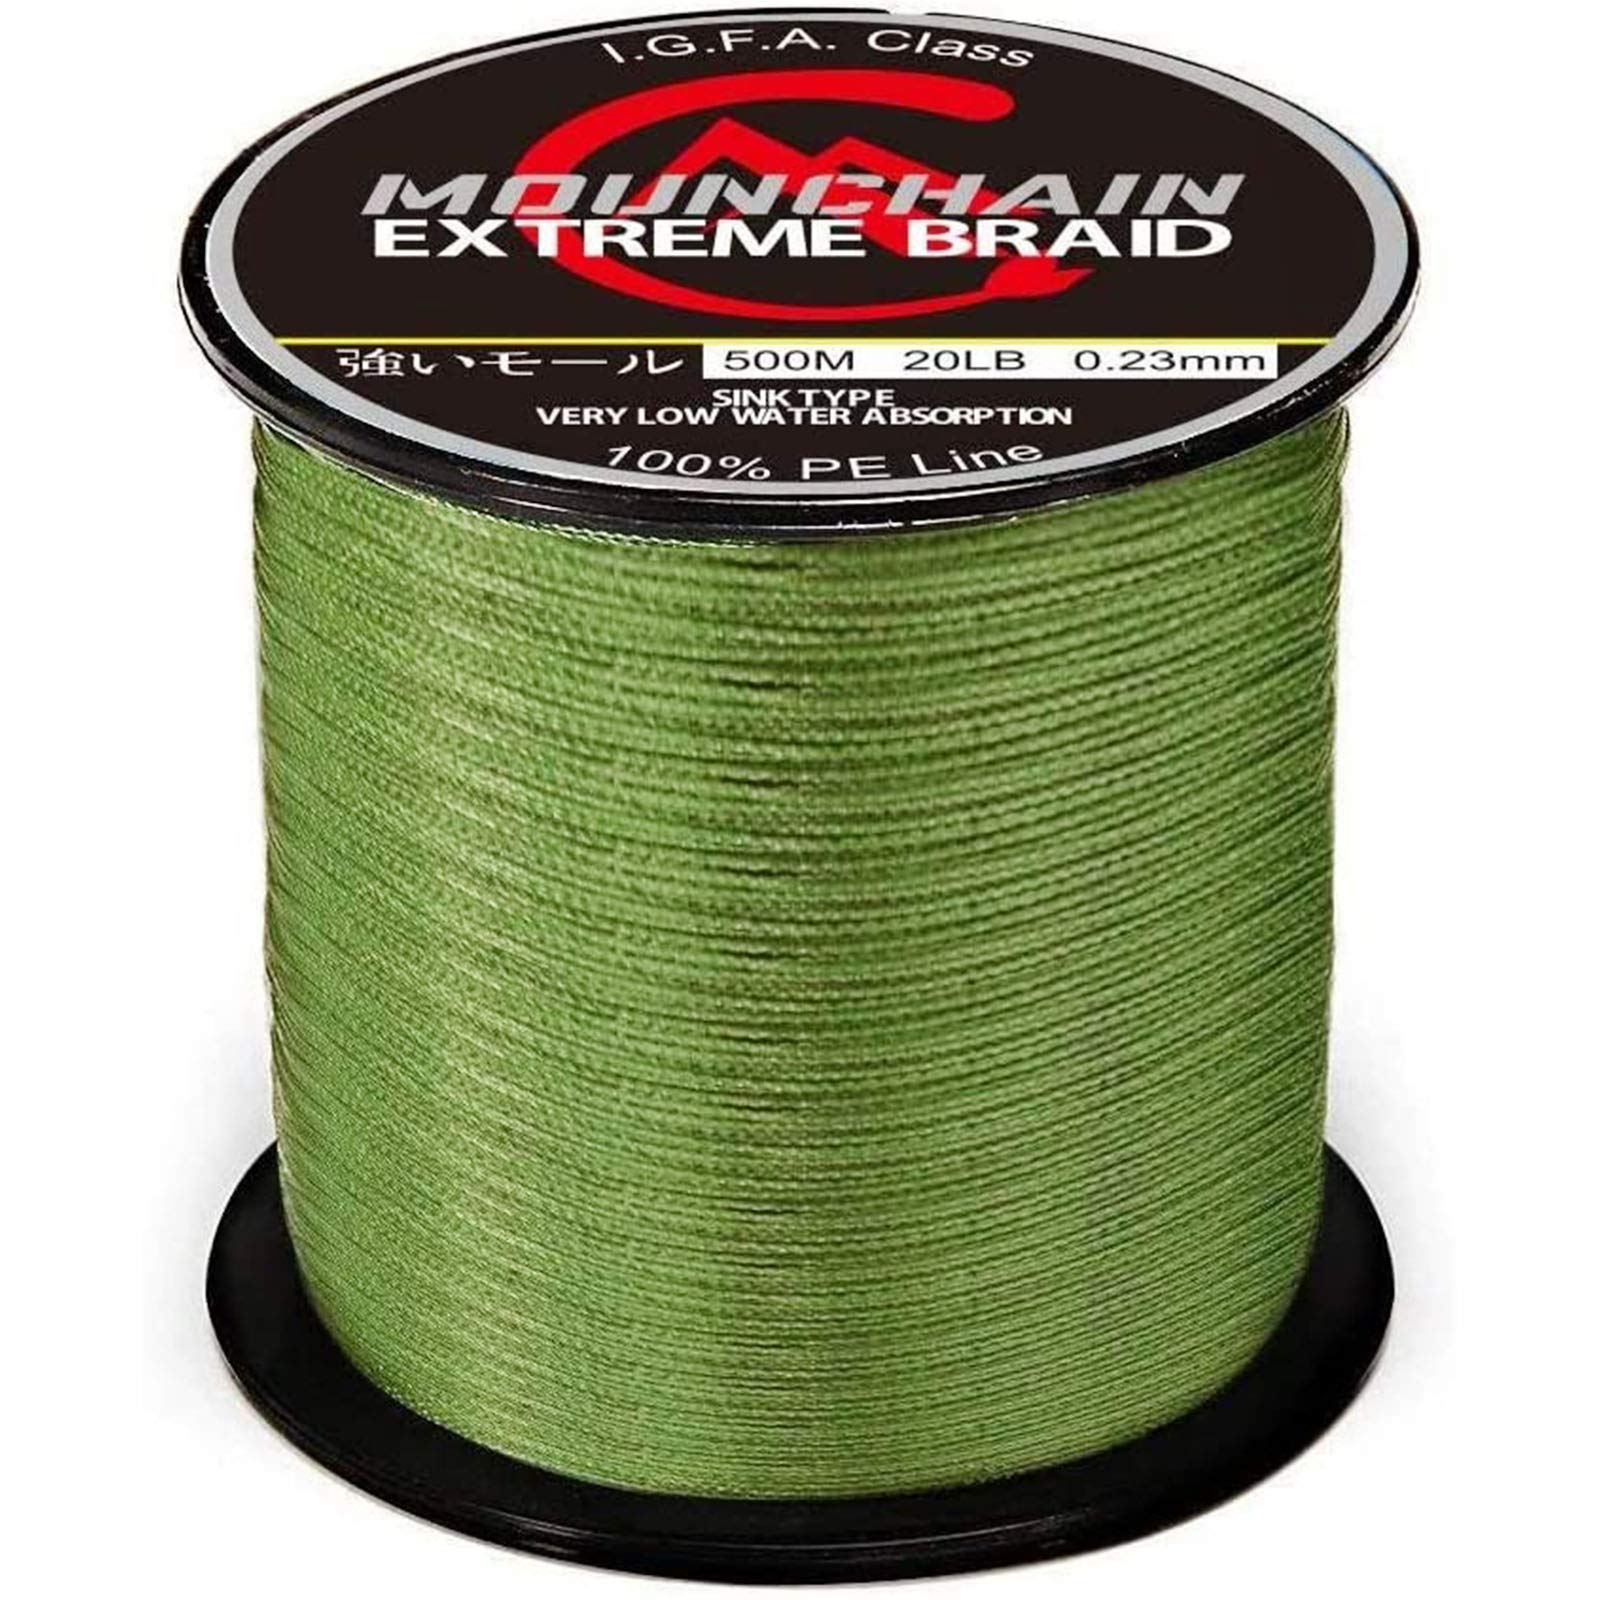 braided fishing line 10lb, braided fishing line 10lb Suppliers and